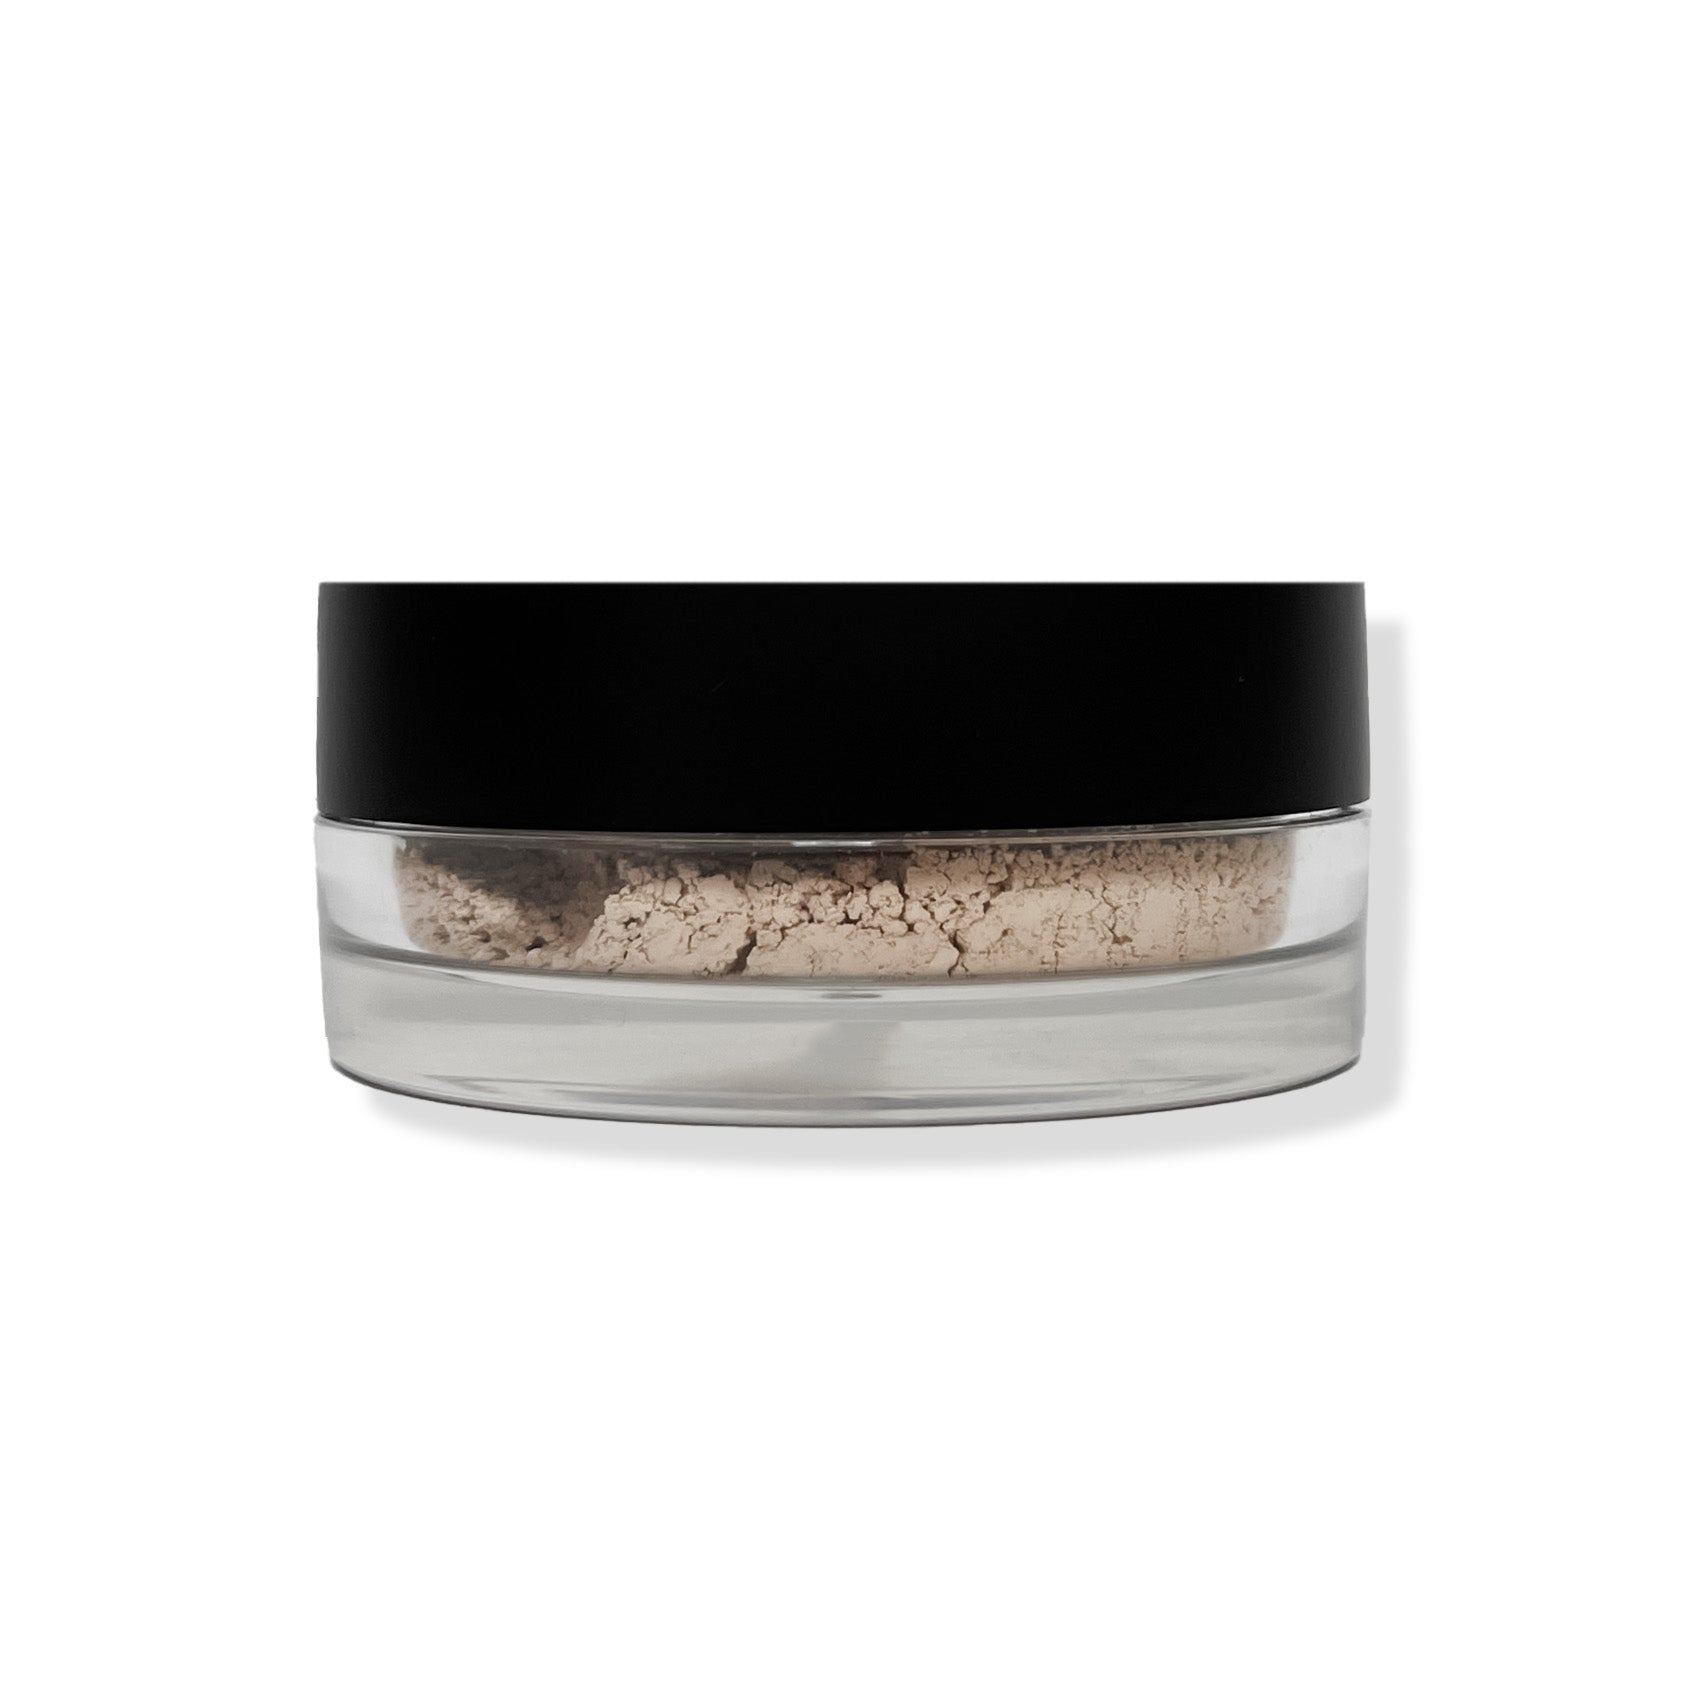 Mineral Matte Foundation Powder | Shop Organic Makeup | withSimplicity